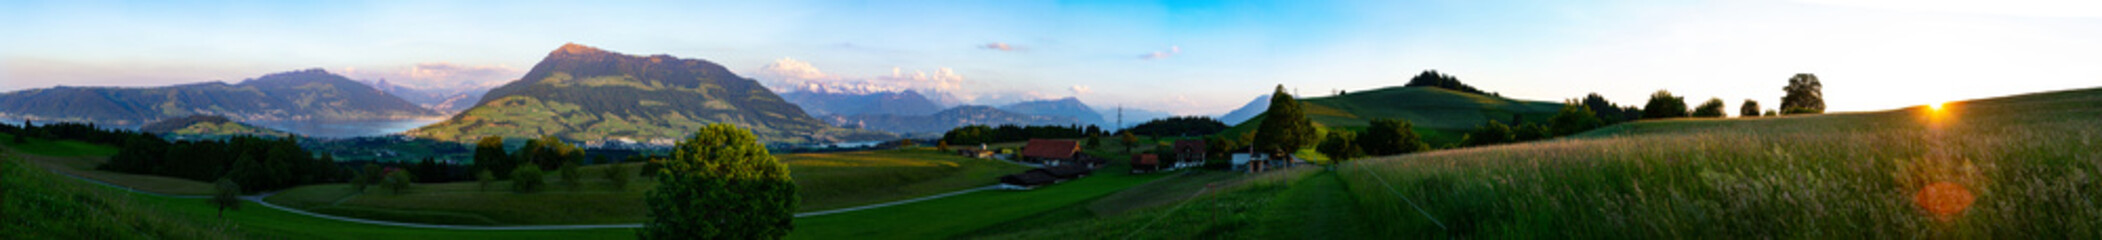 Wide panorama of mountains i Switzerland with view of Zug and Rigi.